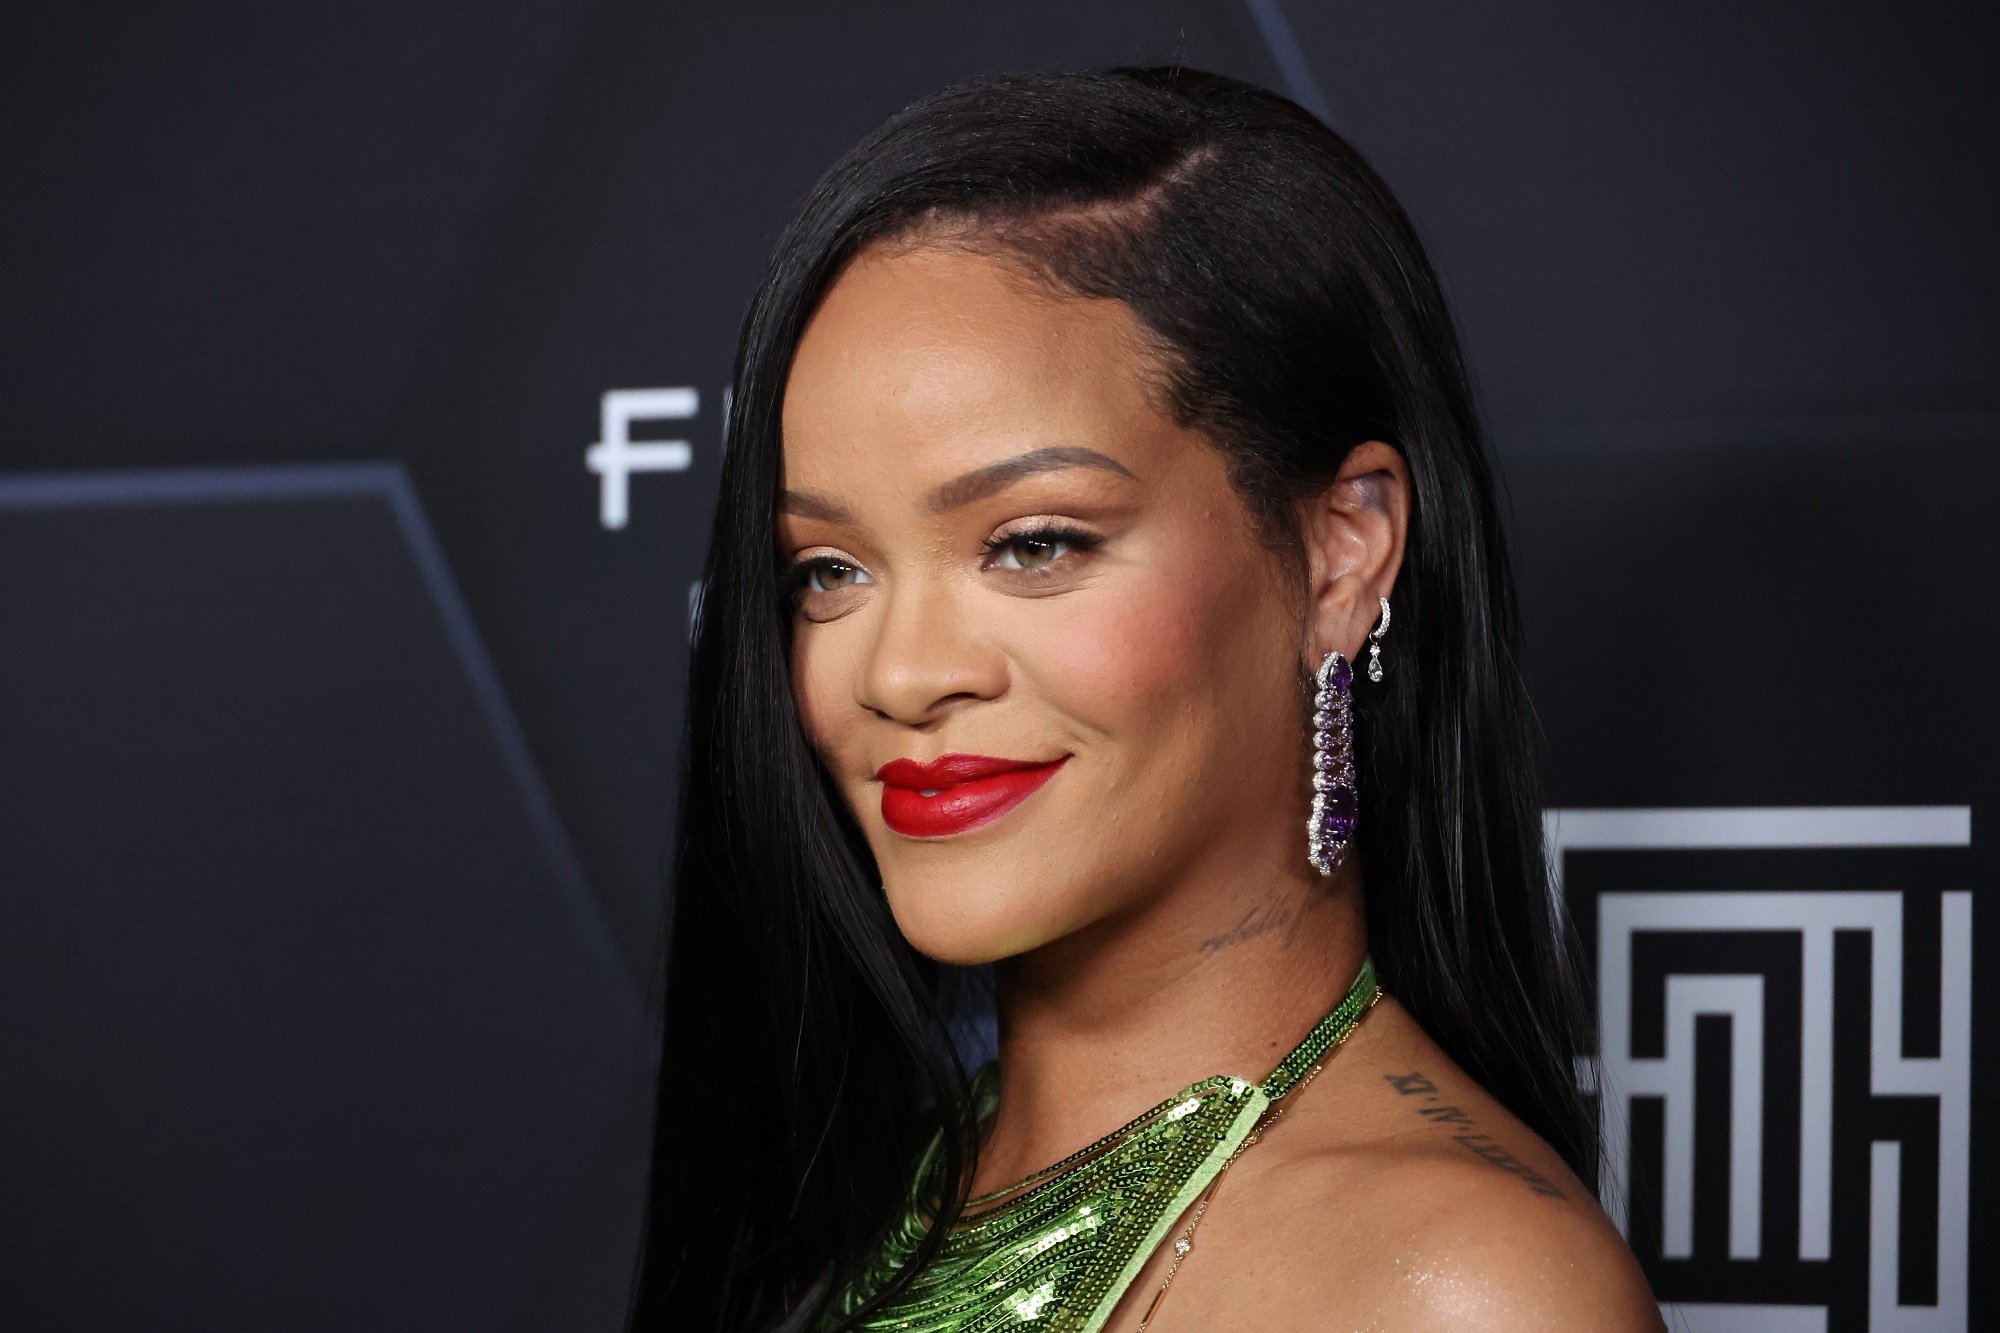 Rihanna Does Not Play Any Musical Instruments on Her Albums